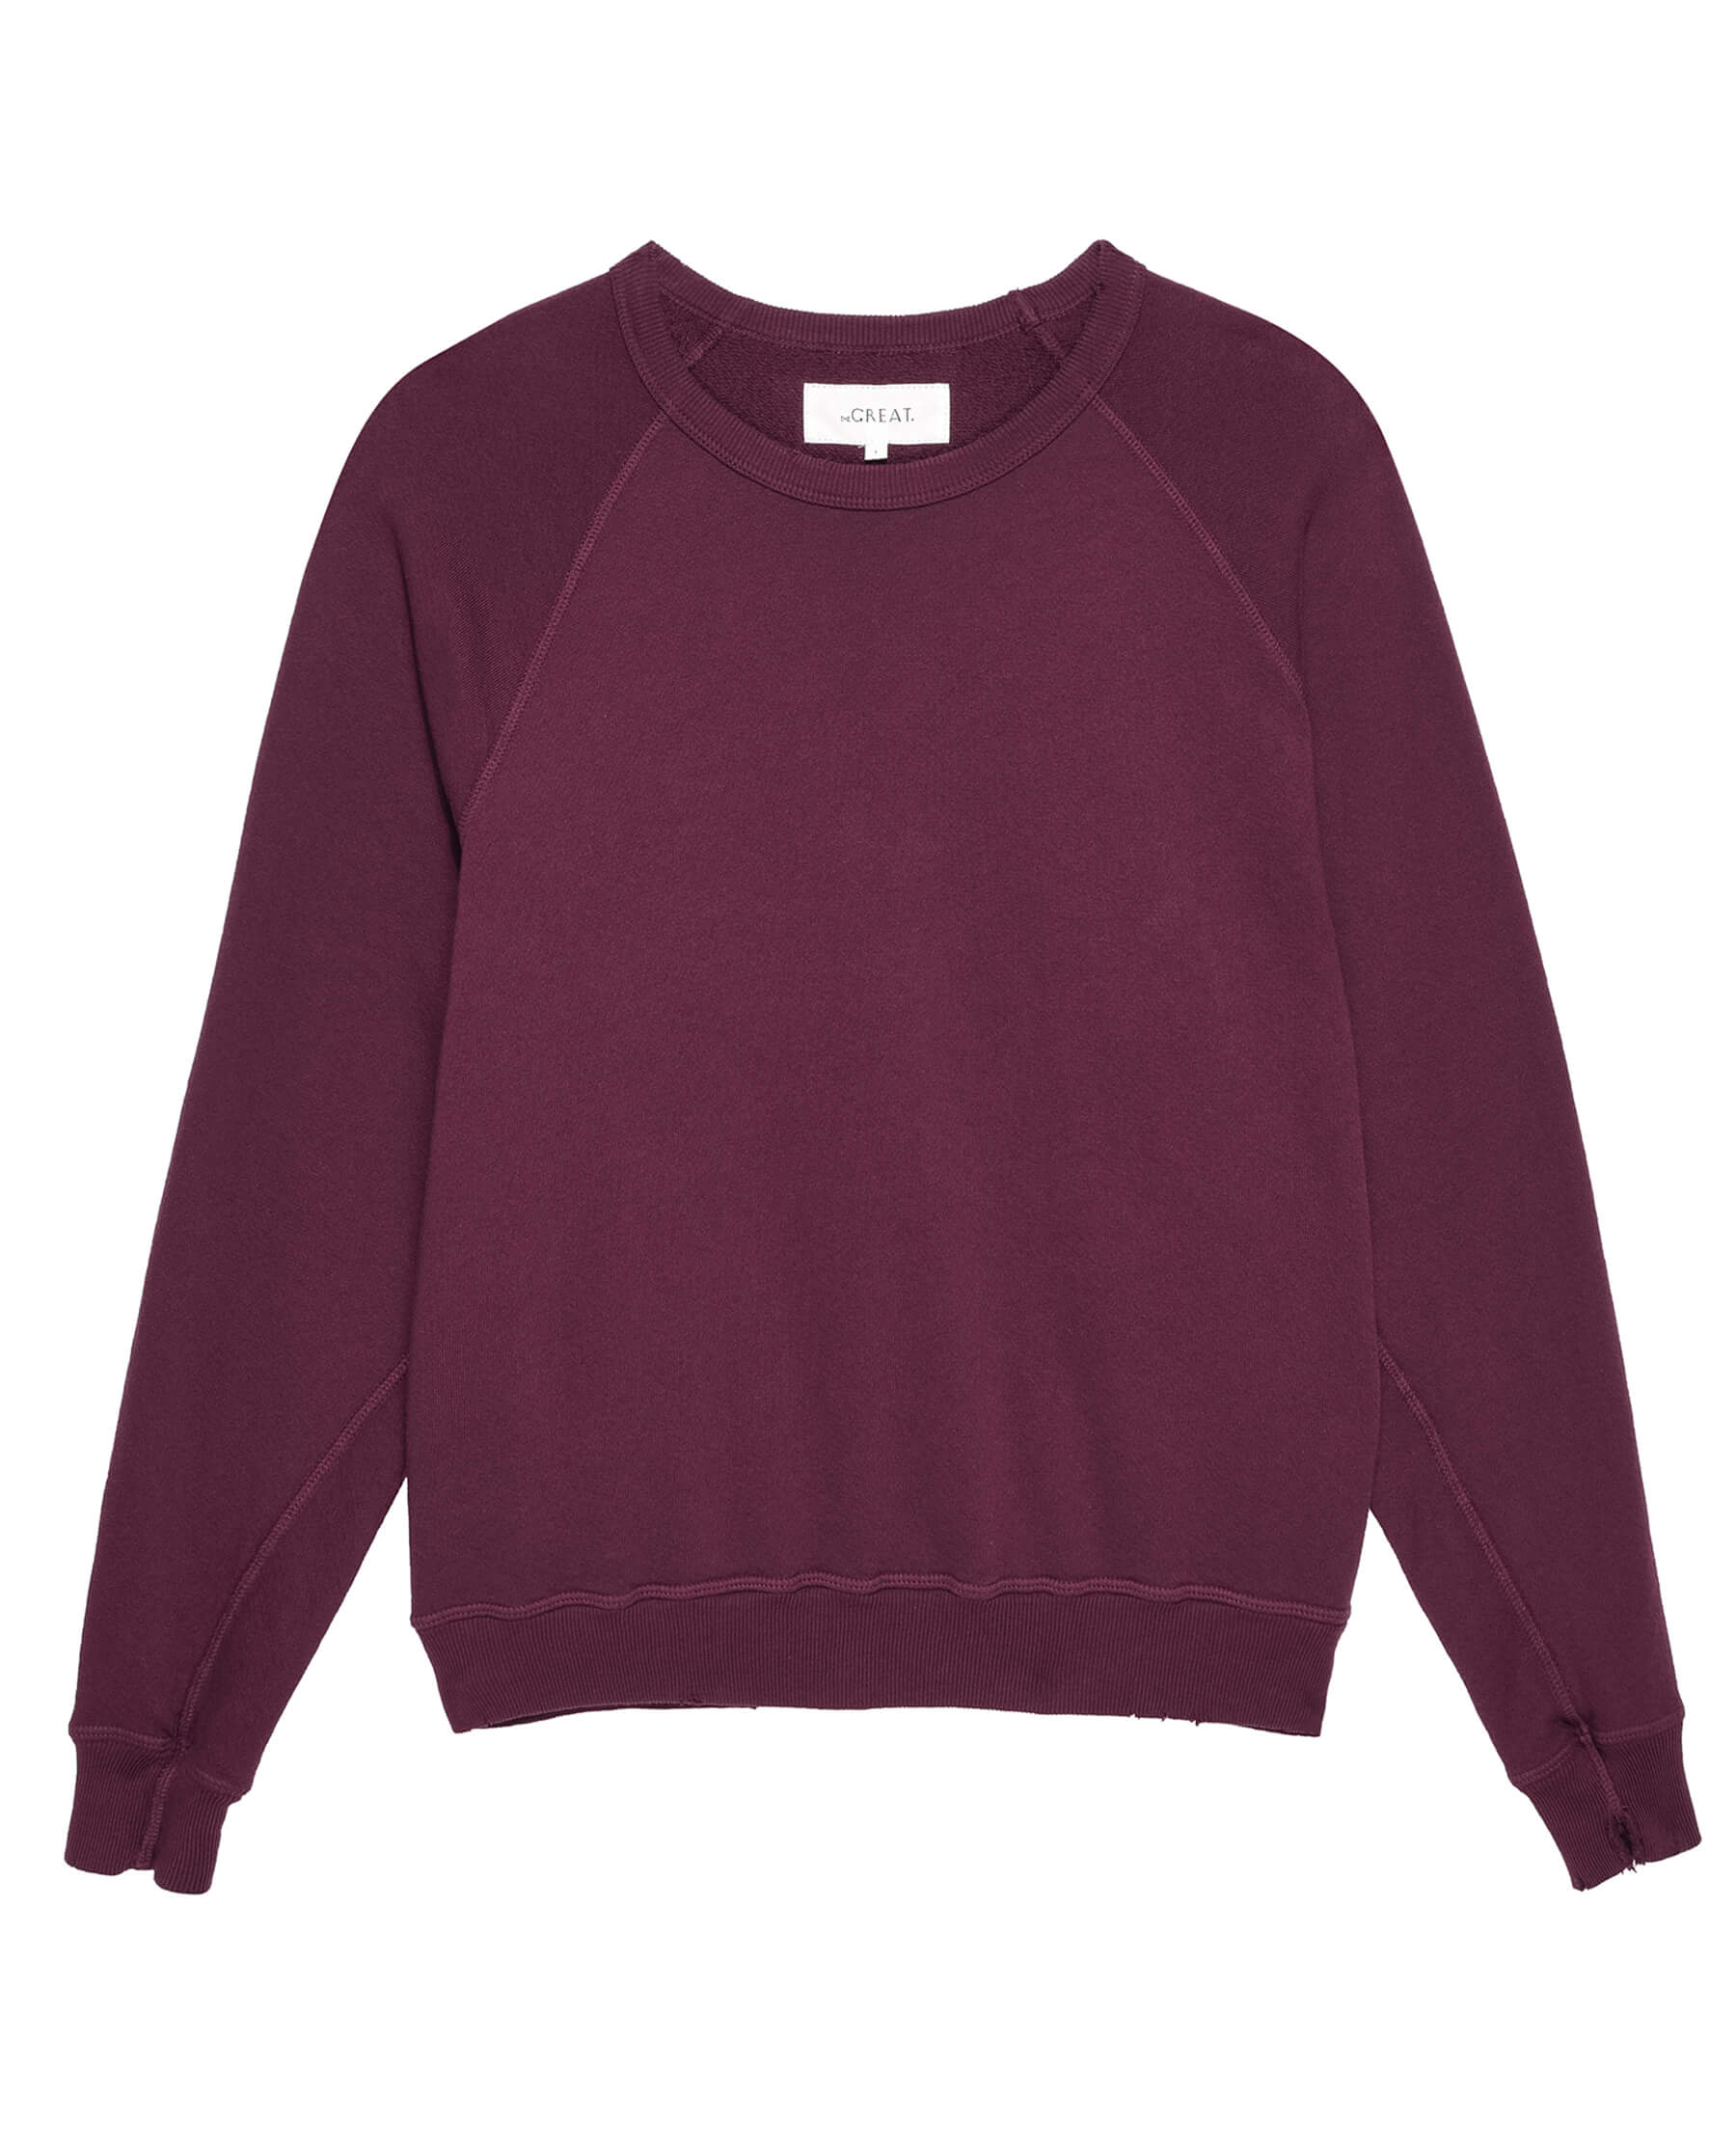 The College Sweatshirt. Solid -- Mulled Wine